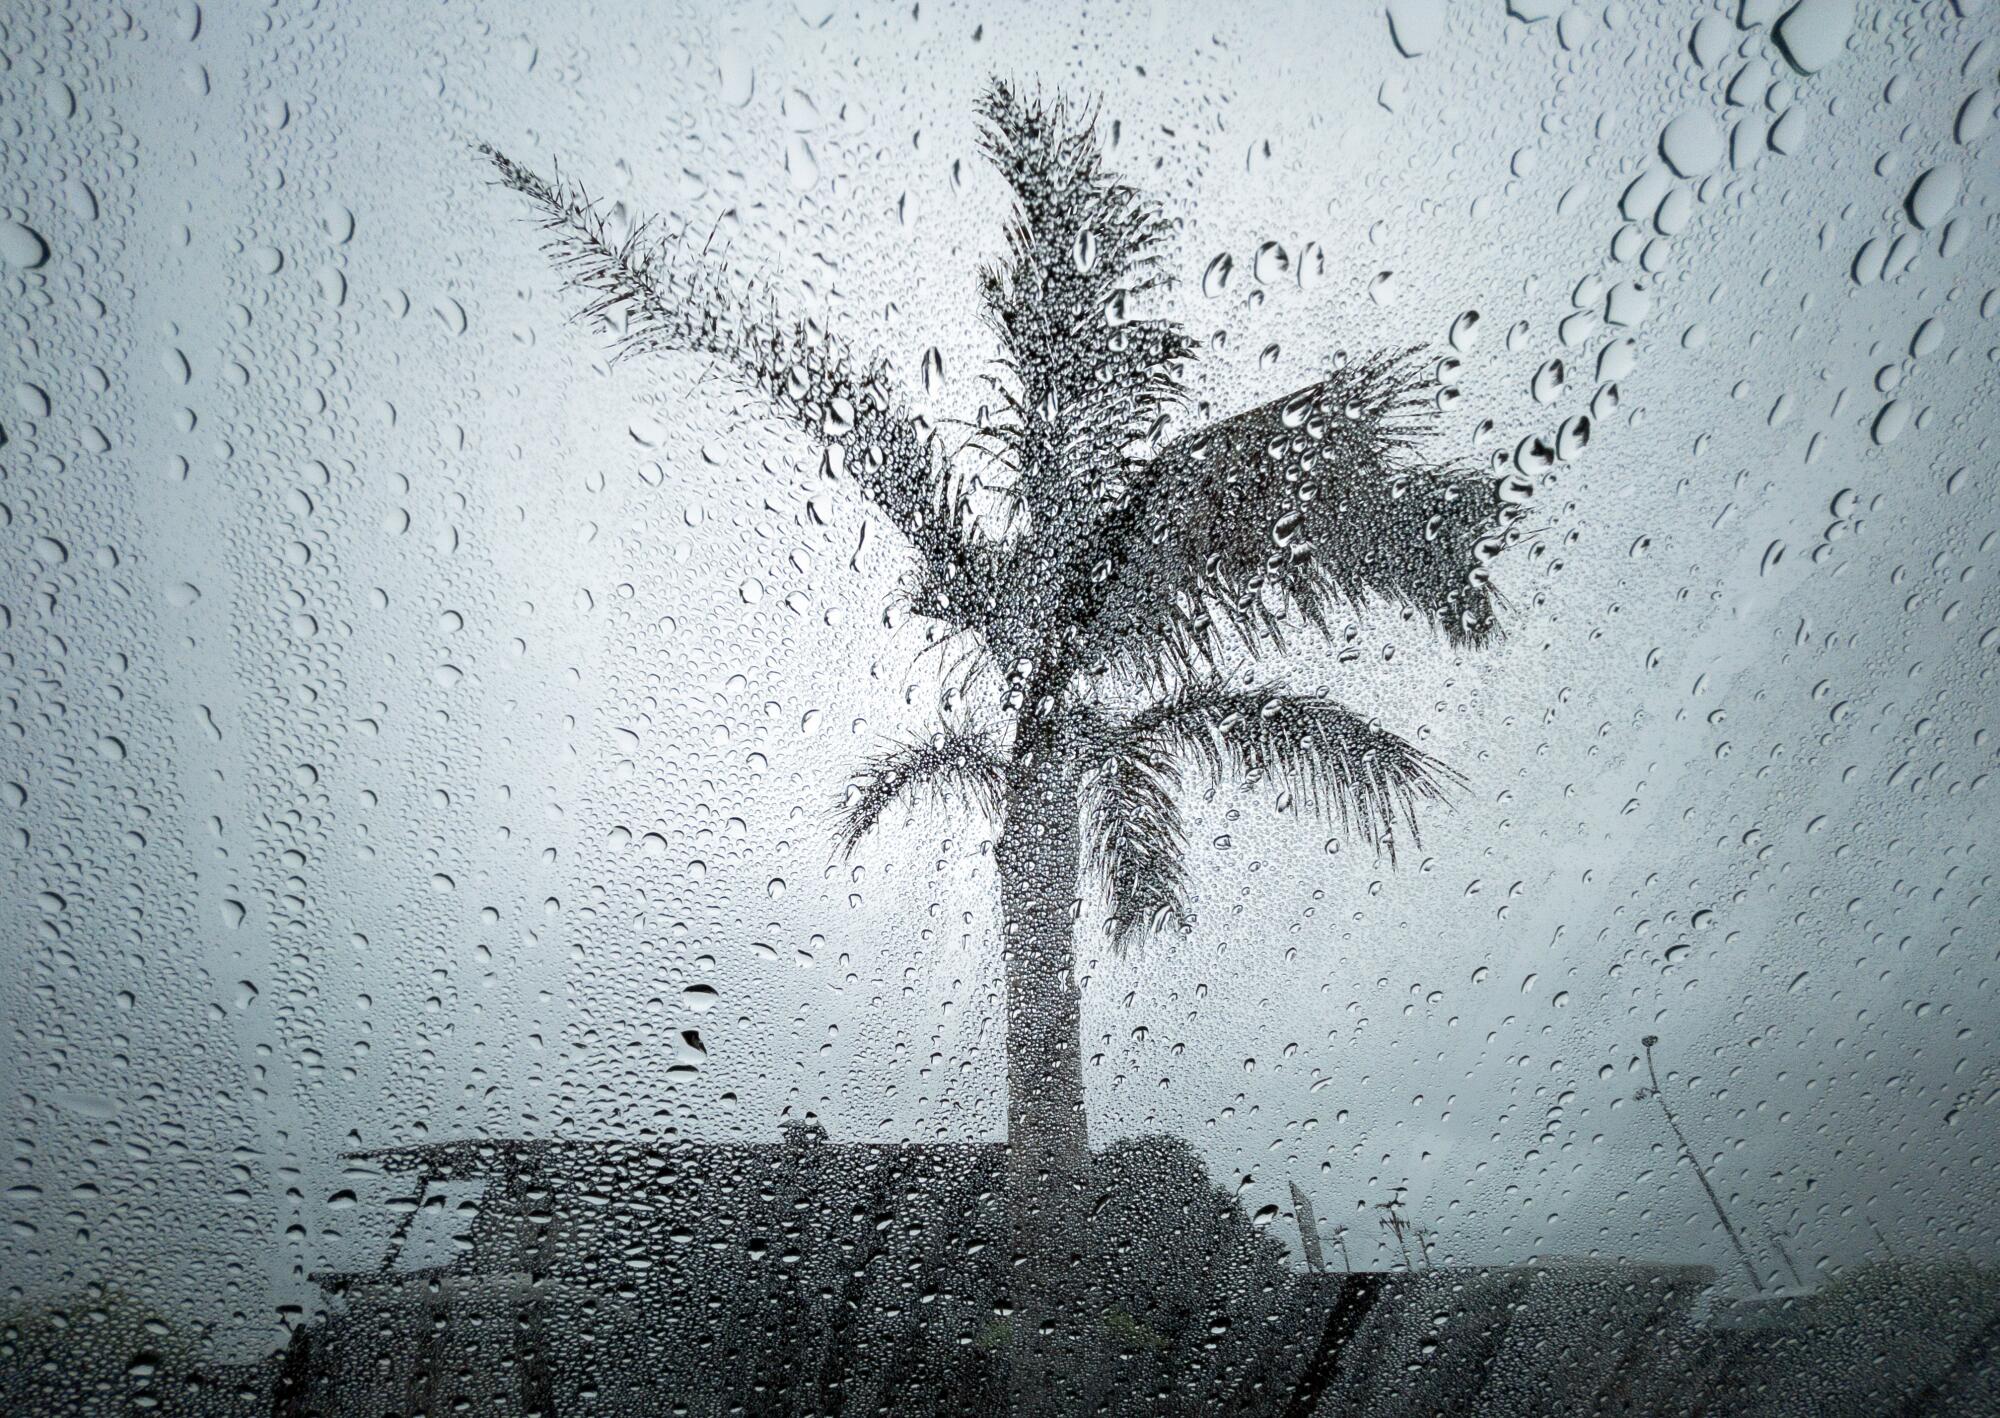  wet windshield with palm tree in background.